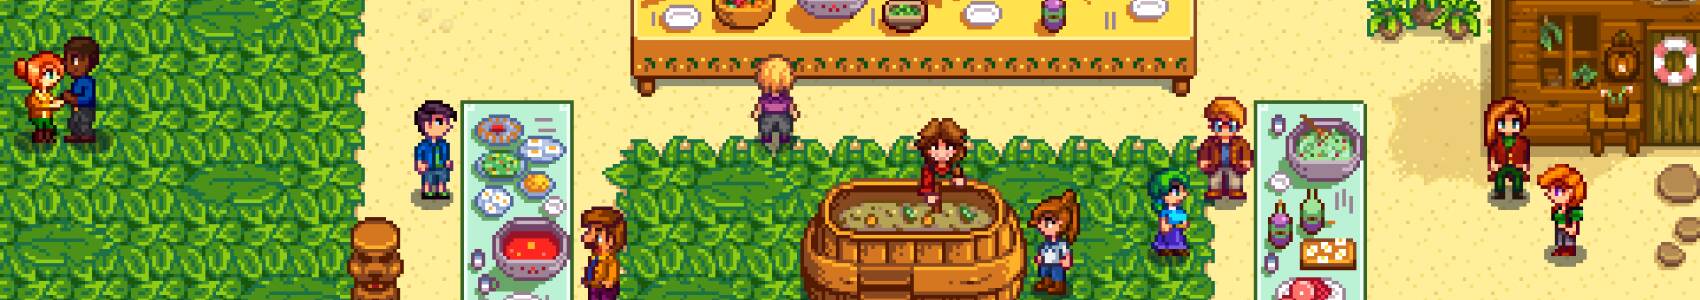 Stardew Valley: Festival of Seasons Comes to Auckland